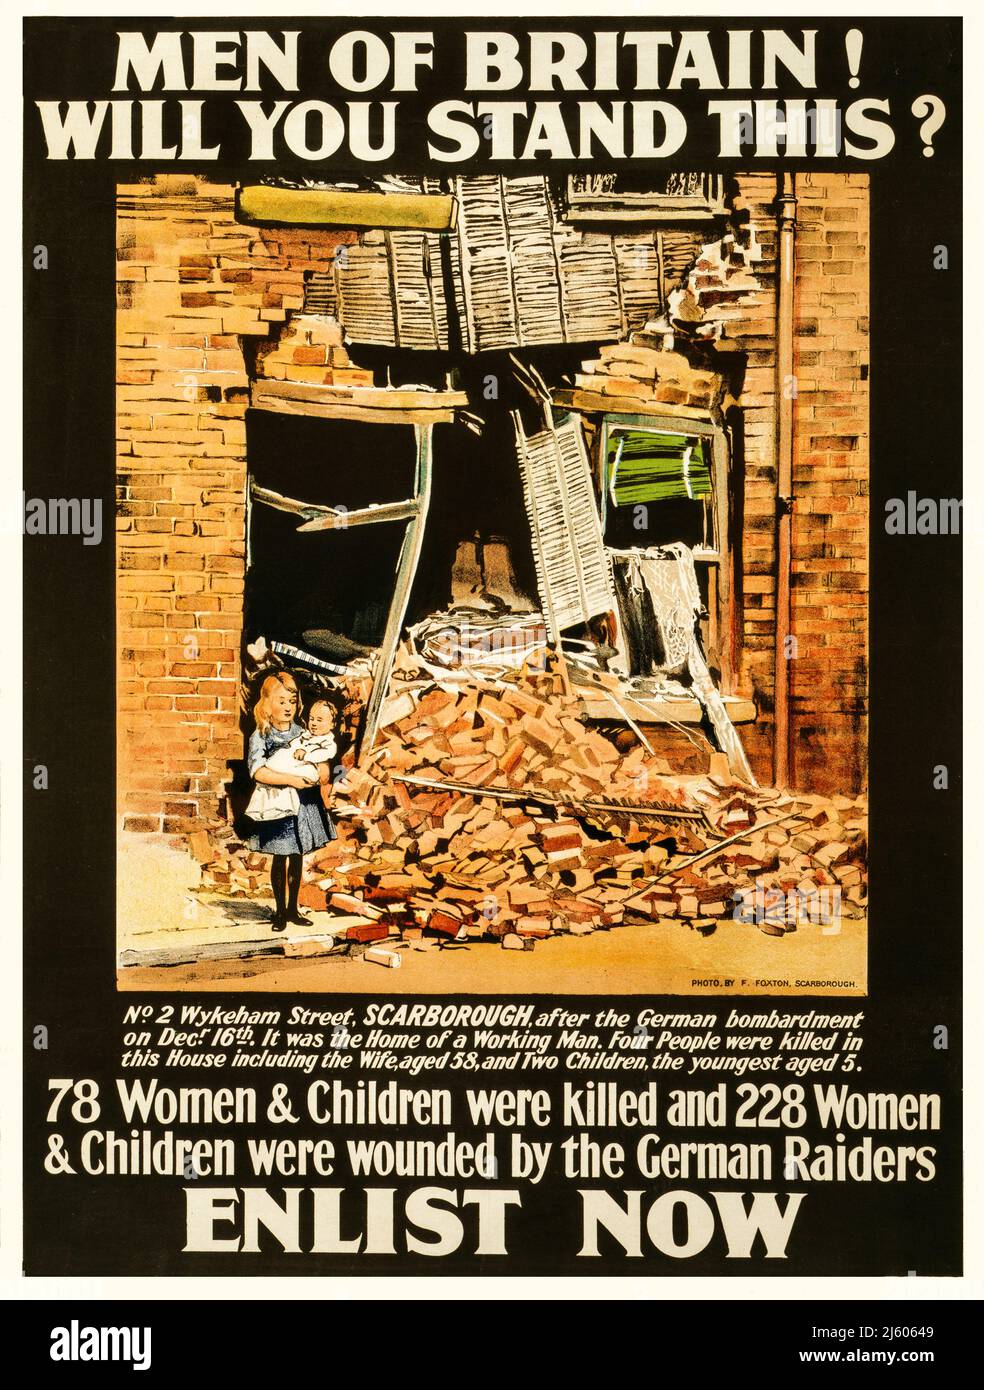 A British advertising recruitment poster from 1915 shows a photograph following an air raid when 78 women & children were killed and 228 women & children wounded by the German raiders. Poster showing a little girl holding a baby, outside a bomb-damaged building. 1915  Photo by F. Foxton of Scarborough. Stock Photo